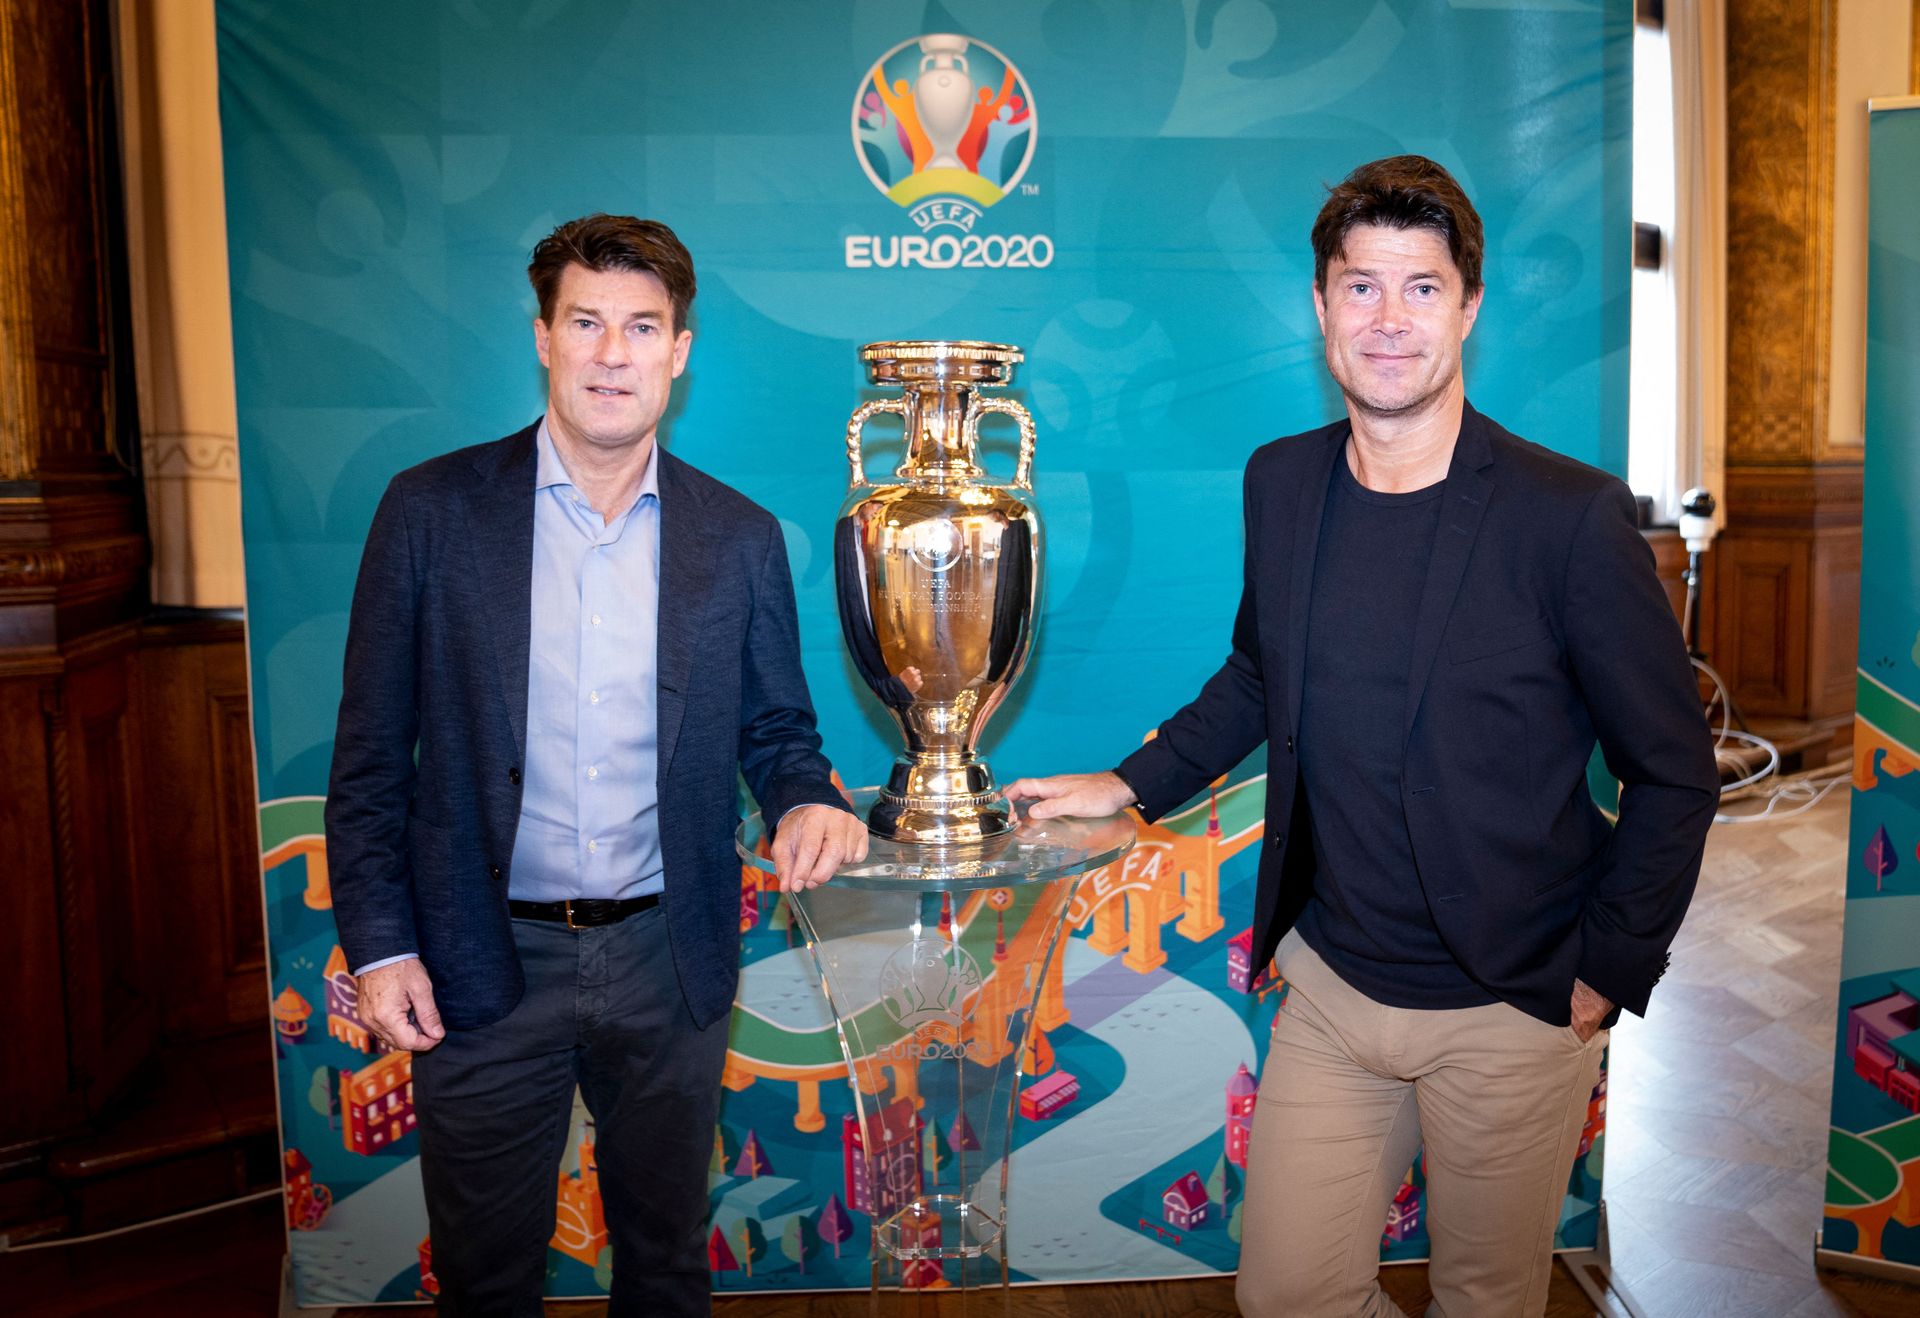 <p>                     Between them, Michael and Brian Laudrup racked up 186 caps and 58 goals for Denmark in the 1980s and 1990s.                   </p>                                      <p>                     Michael was one of the game's greatest playmakers and graced some of Europe's biggest clubs – including Barcelona, Real Madrid and Juventus. Brian played as a winger and represented some big teams, too – Bayern Munich, Fiorentina and Ajax among them. He also won Euro 92 while his brother decided to sit out the tournament.                   </p>